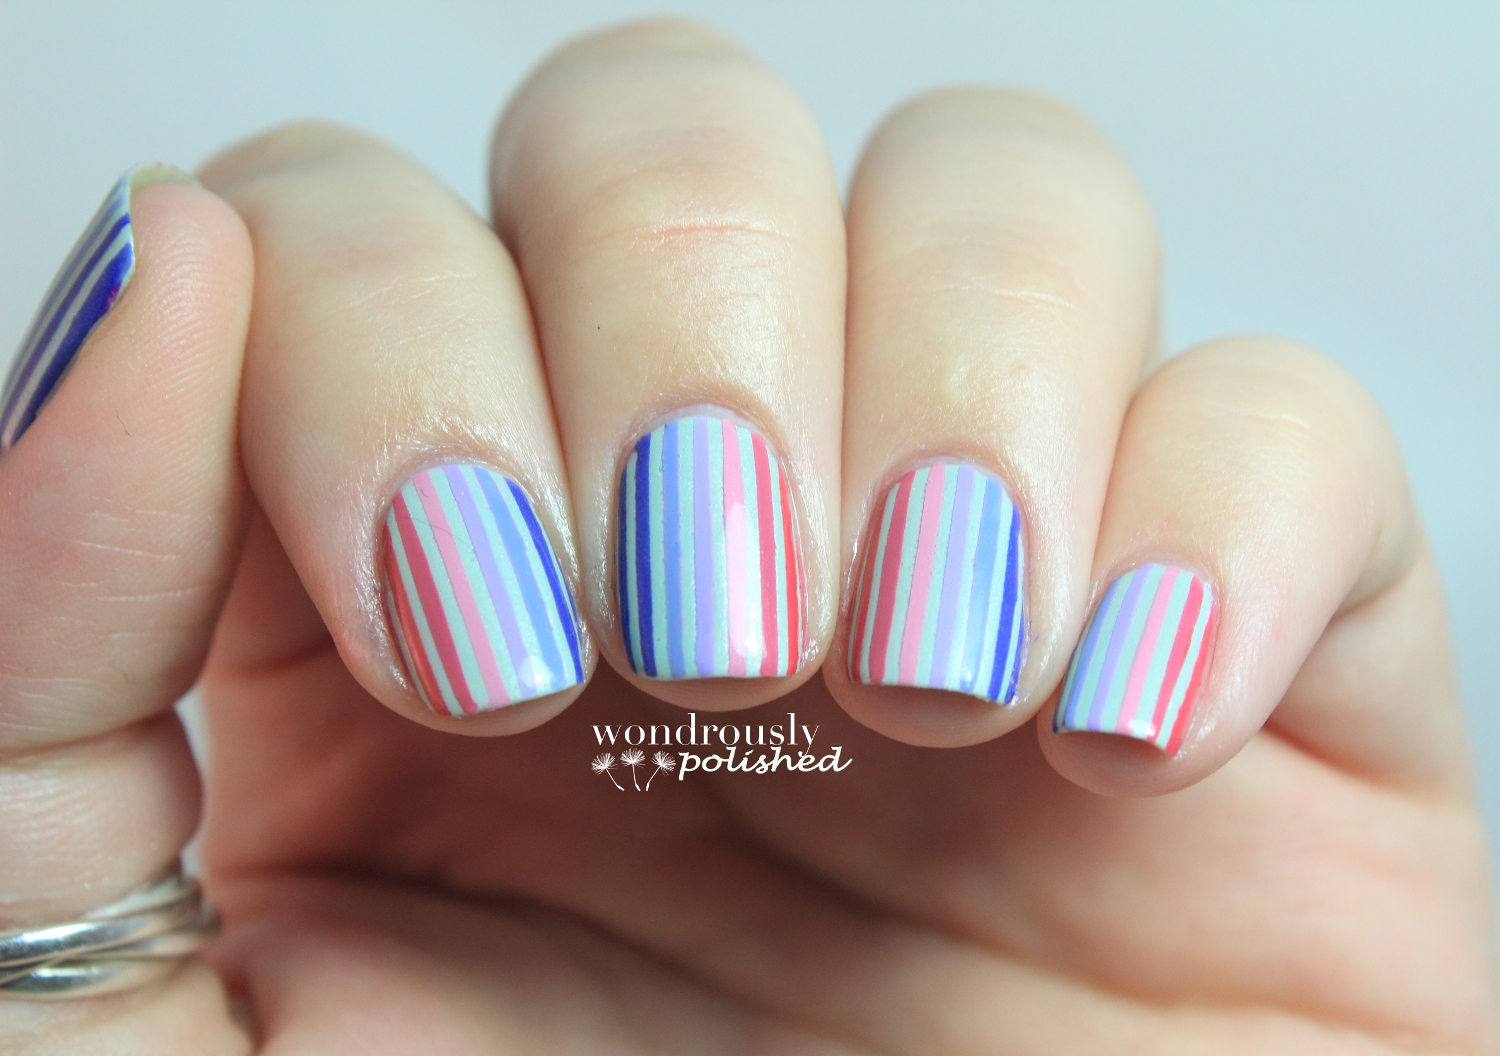 2. Adorable Striped Nail Designs to Try - wide 4